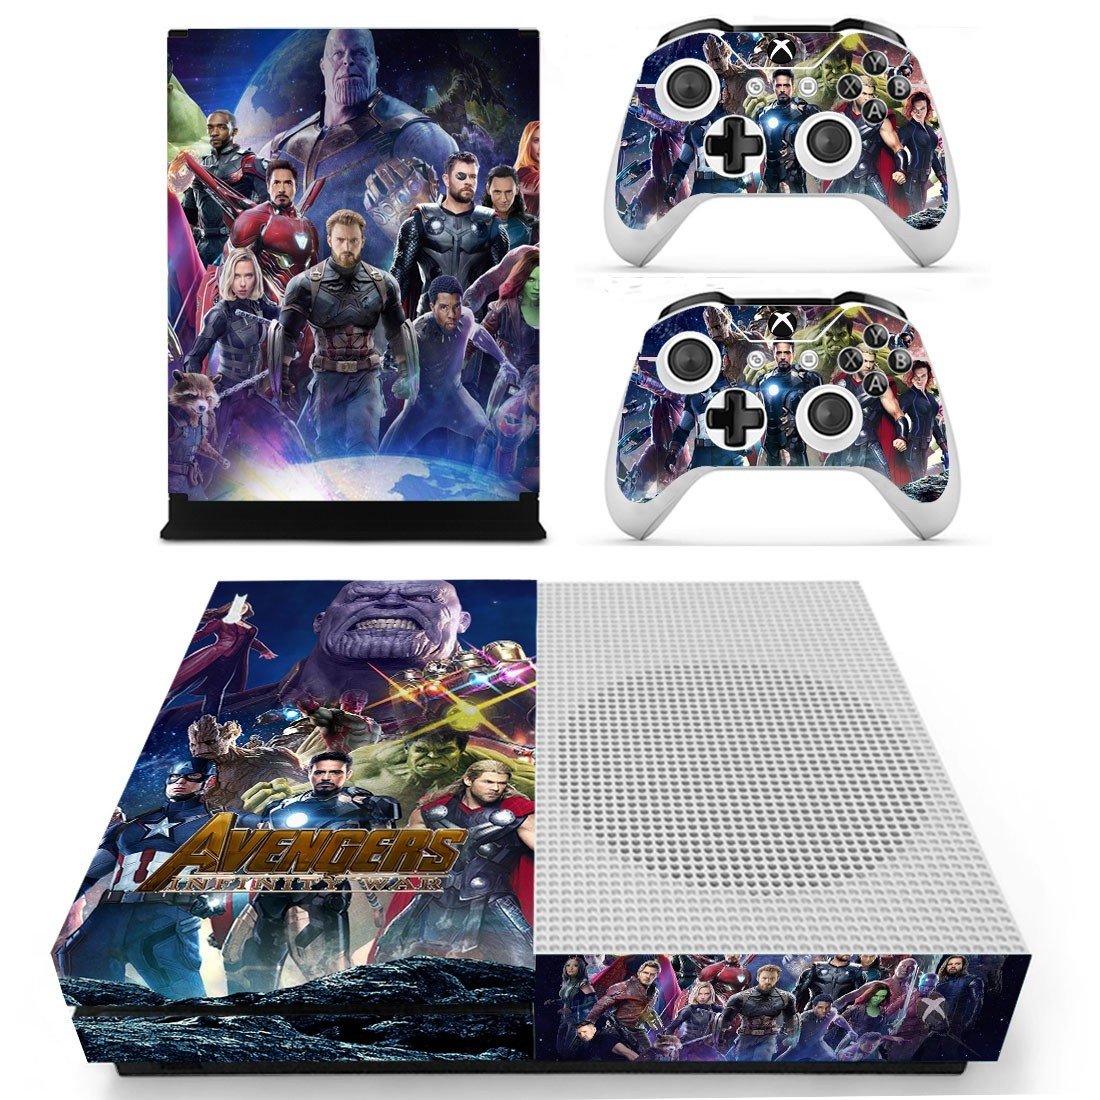 Xbox One S And Controllers Skin Sticker - Avengers Infinity War